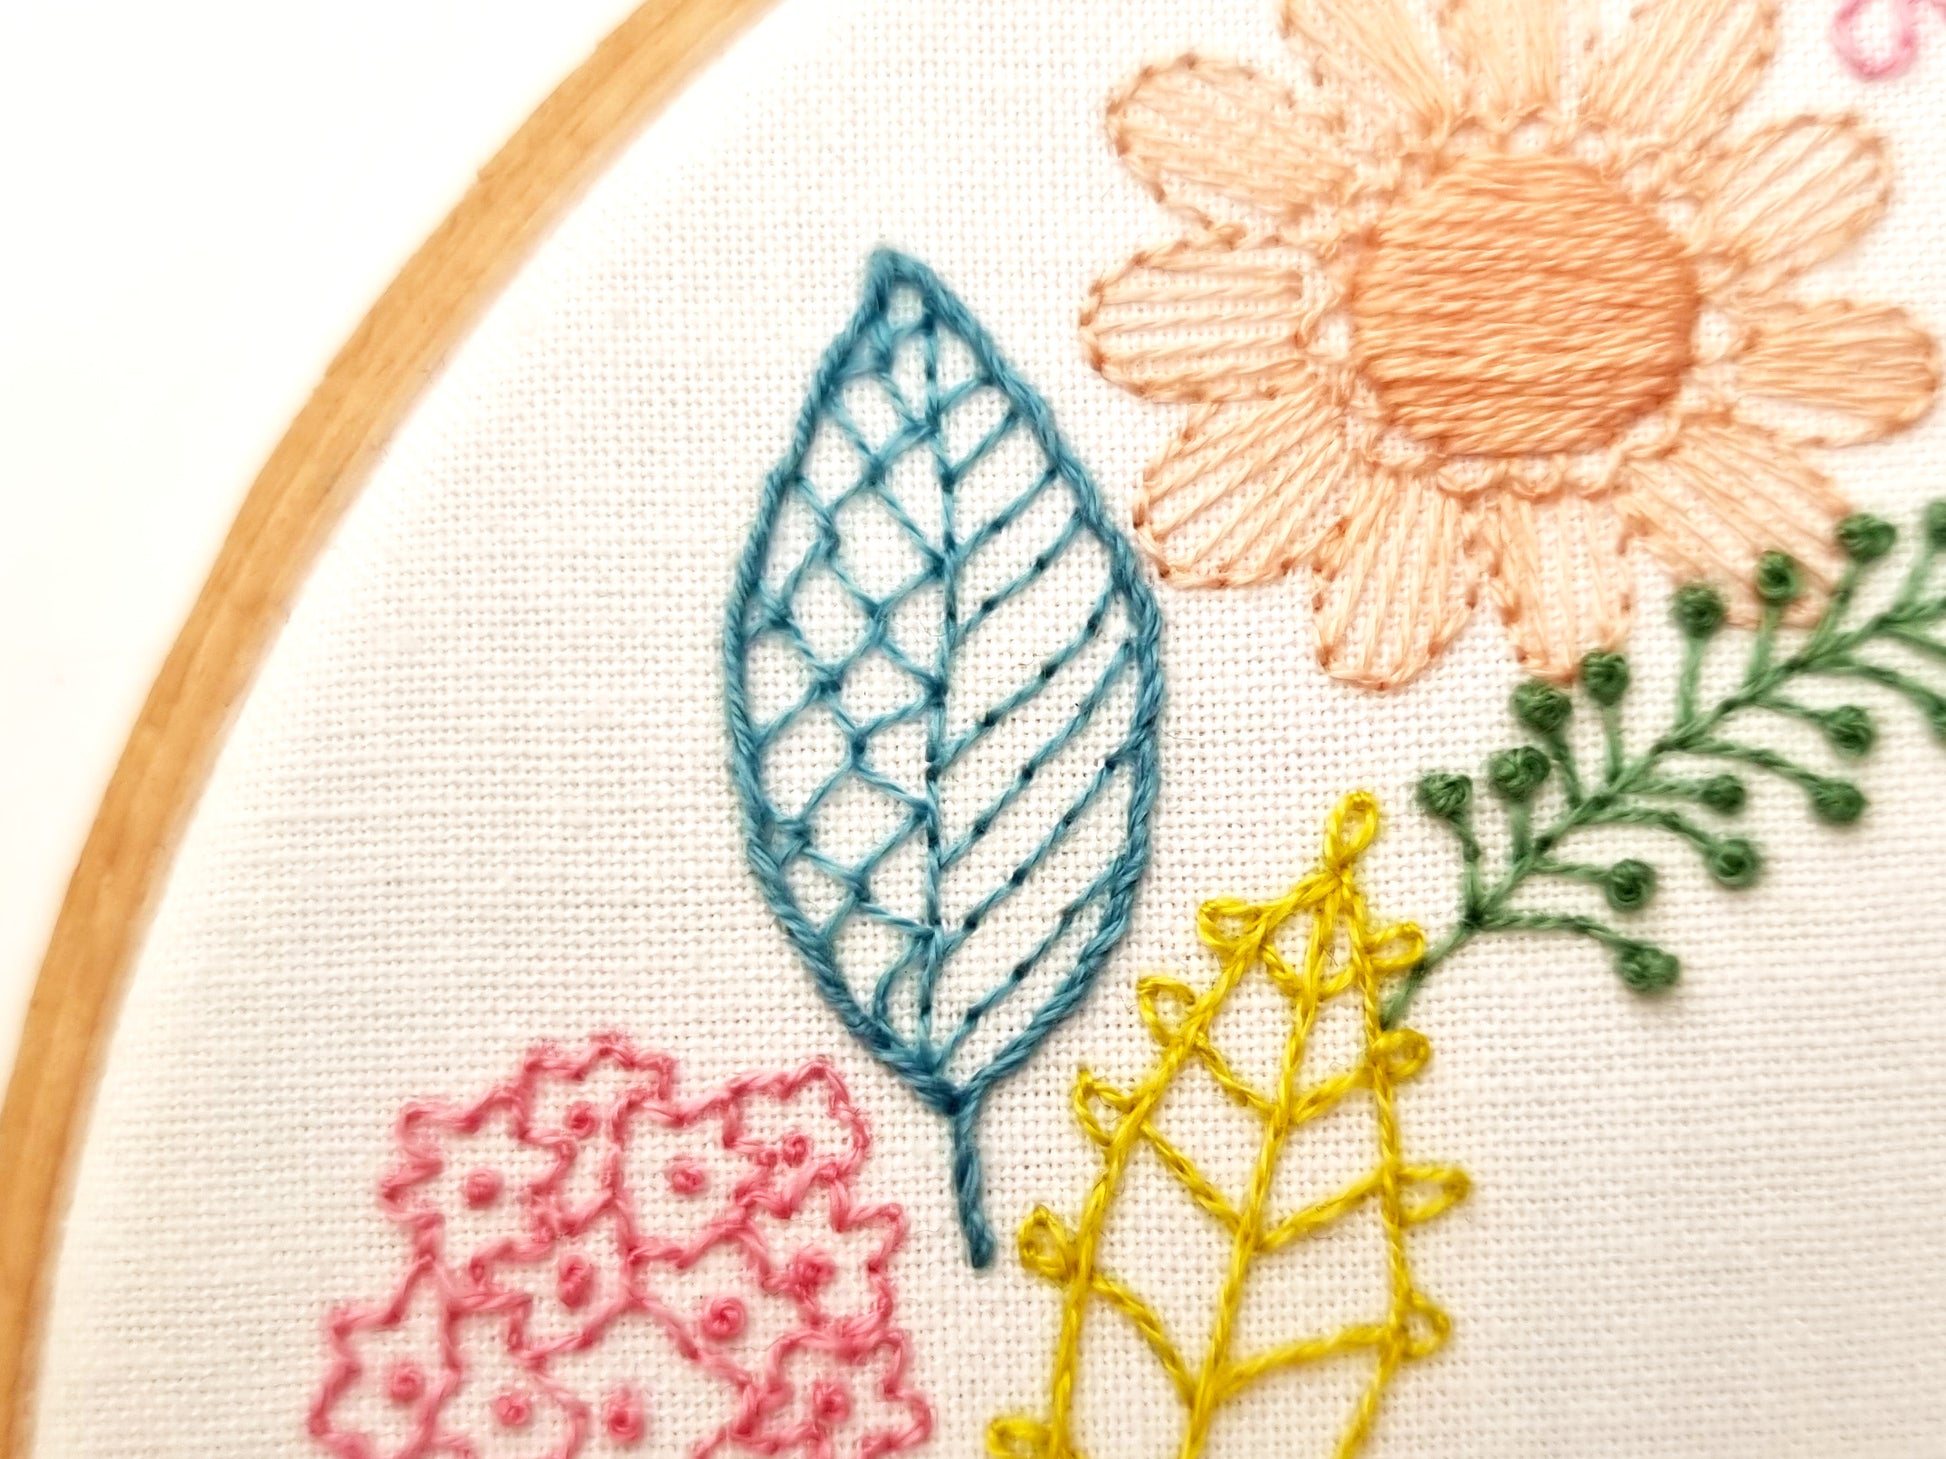 Foliage Embroidery Patterns, Leaf Embroidery Patterns, Modern Stamped Embroidery Patterns UK